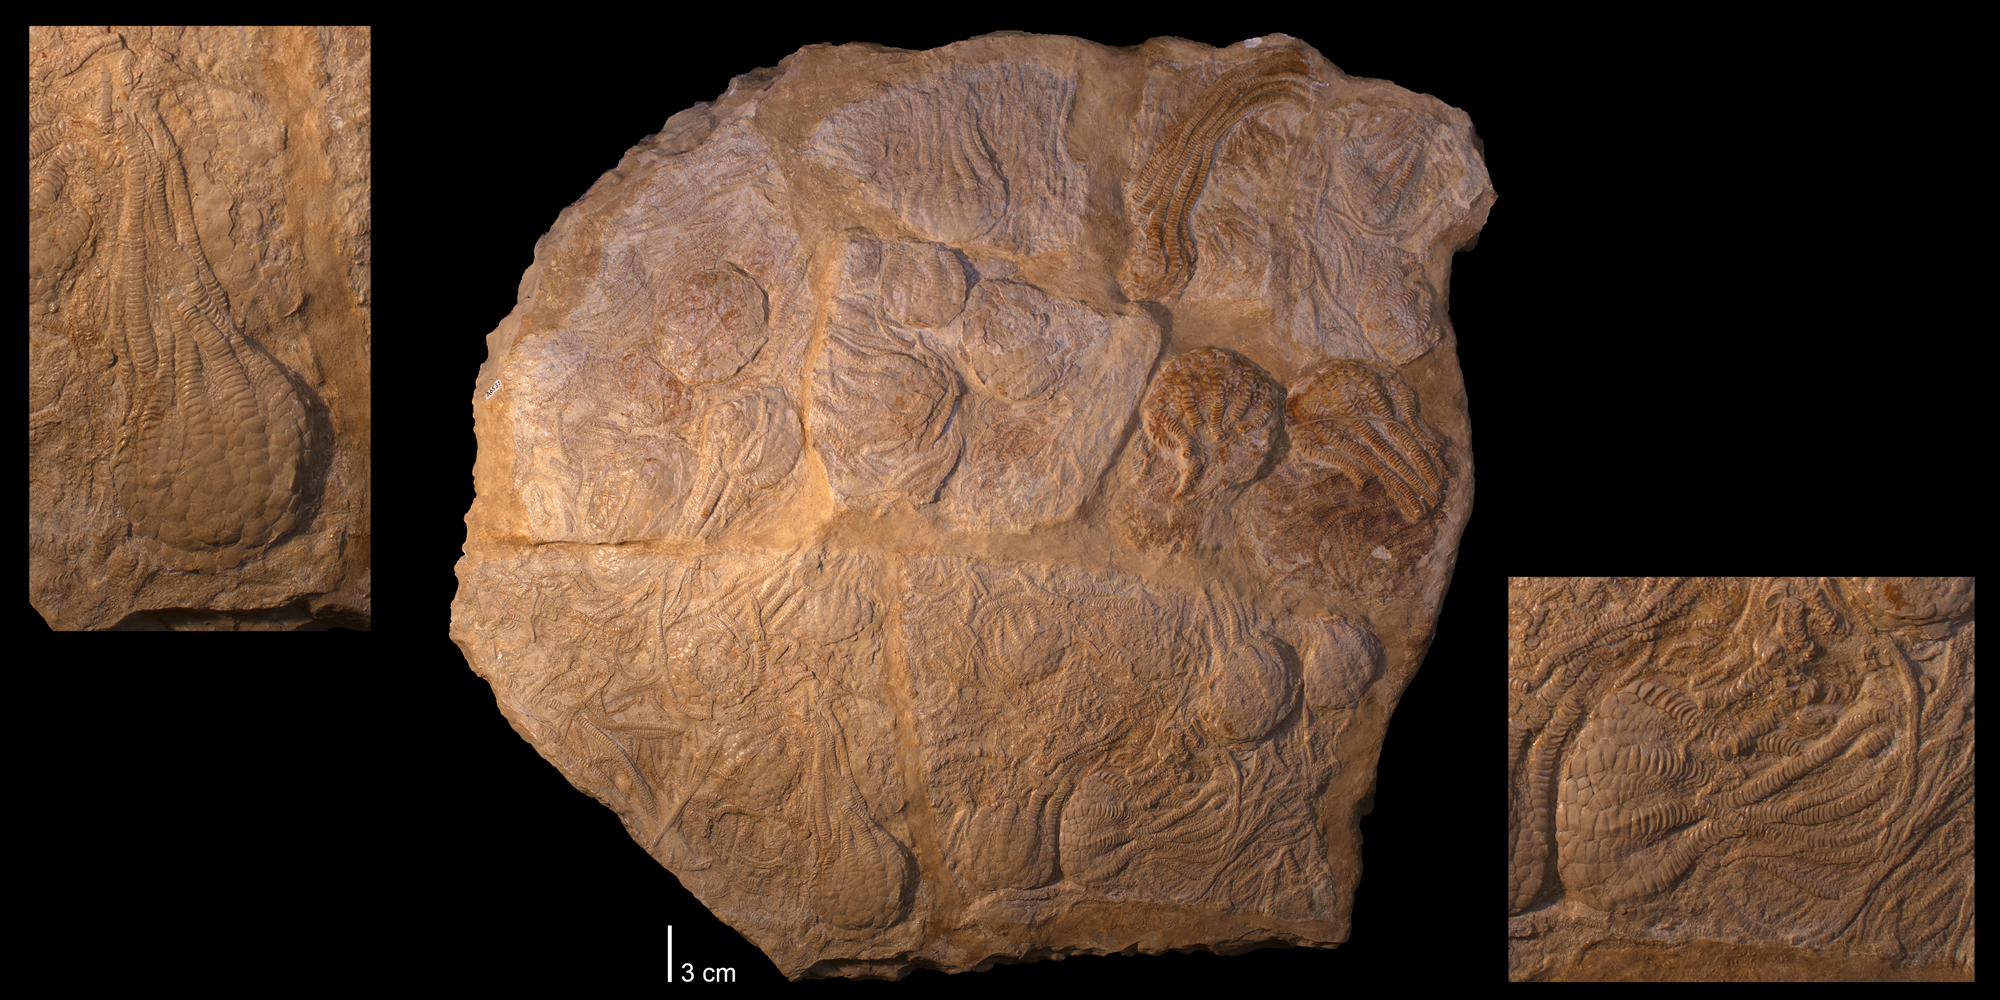 Photos of a slab of Uintacrinus, a Cretaceous stalkless crinoid. Each animal consists of a calyx and arms.